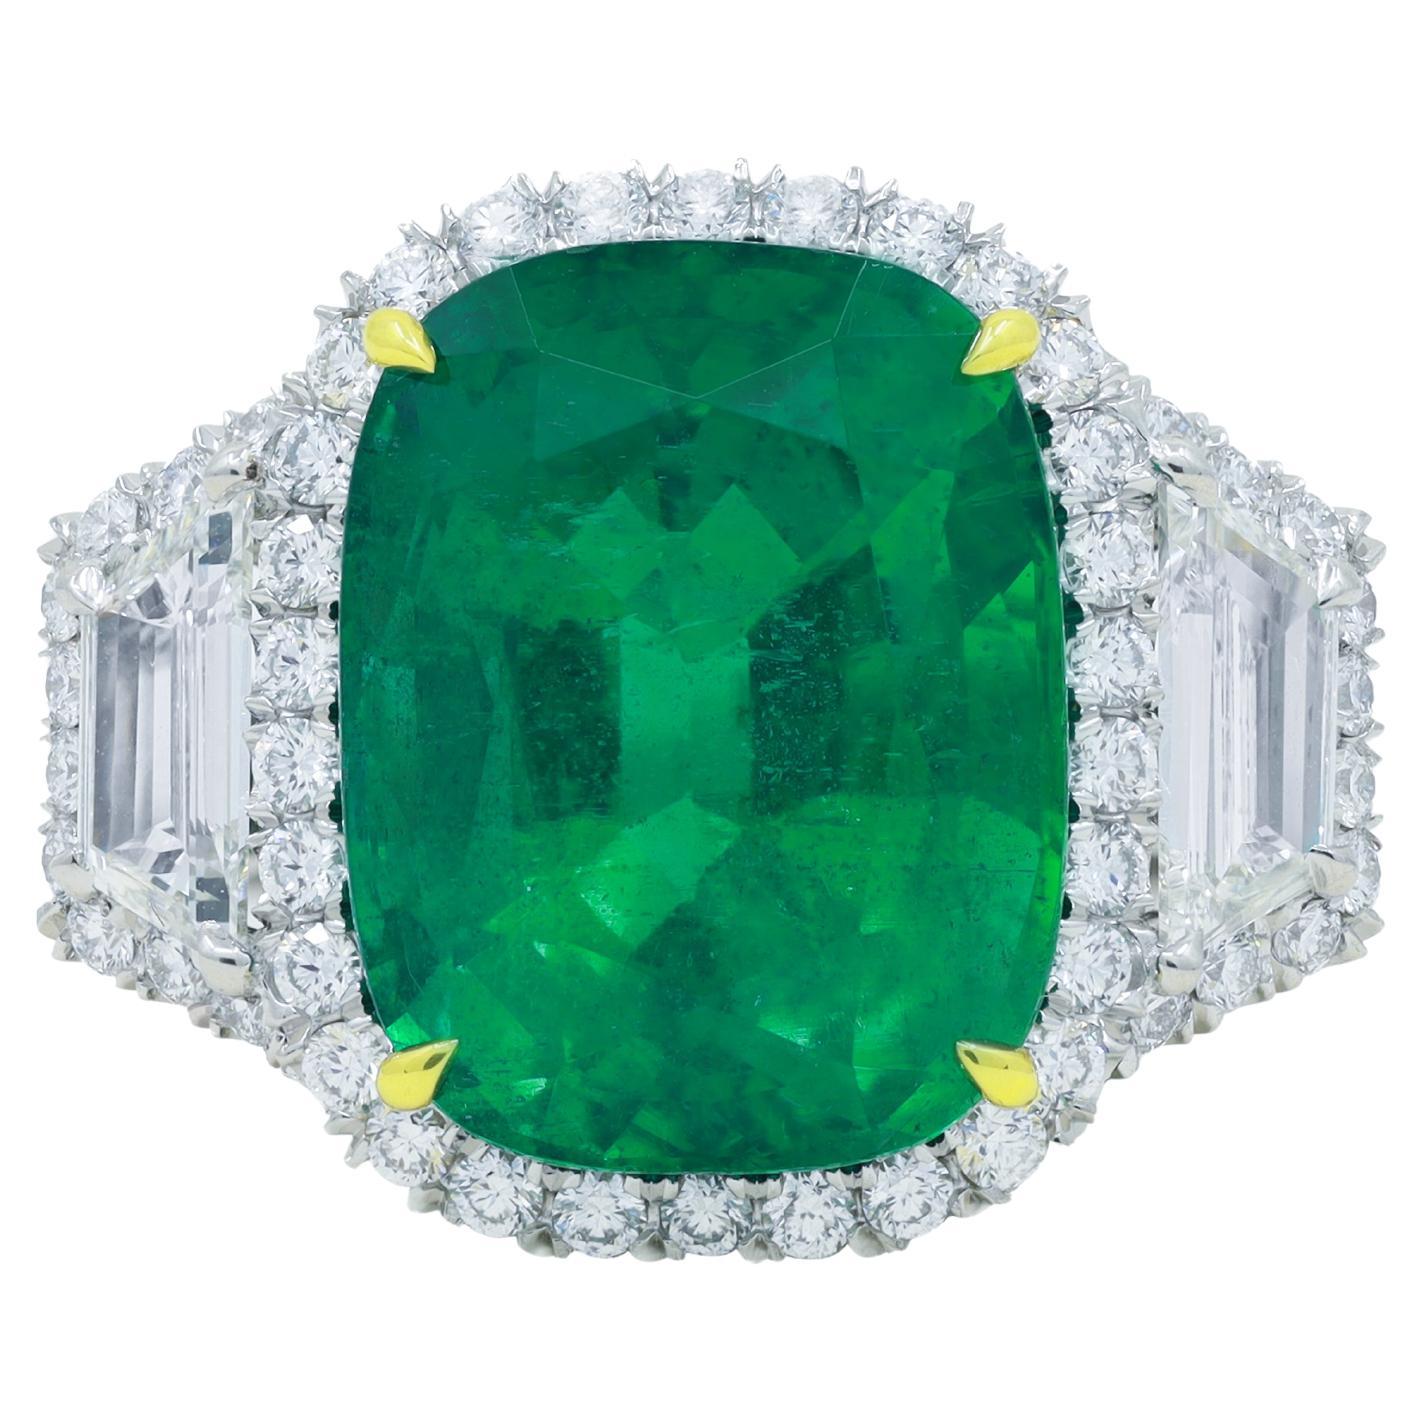 Diana M. Platinum and 18 kt yellow gold emerald and diamond ring featuring 11.22